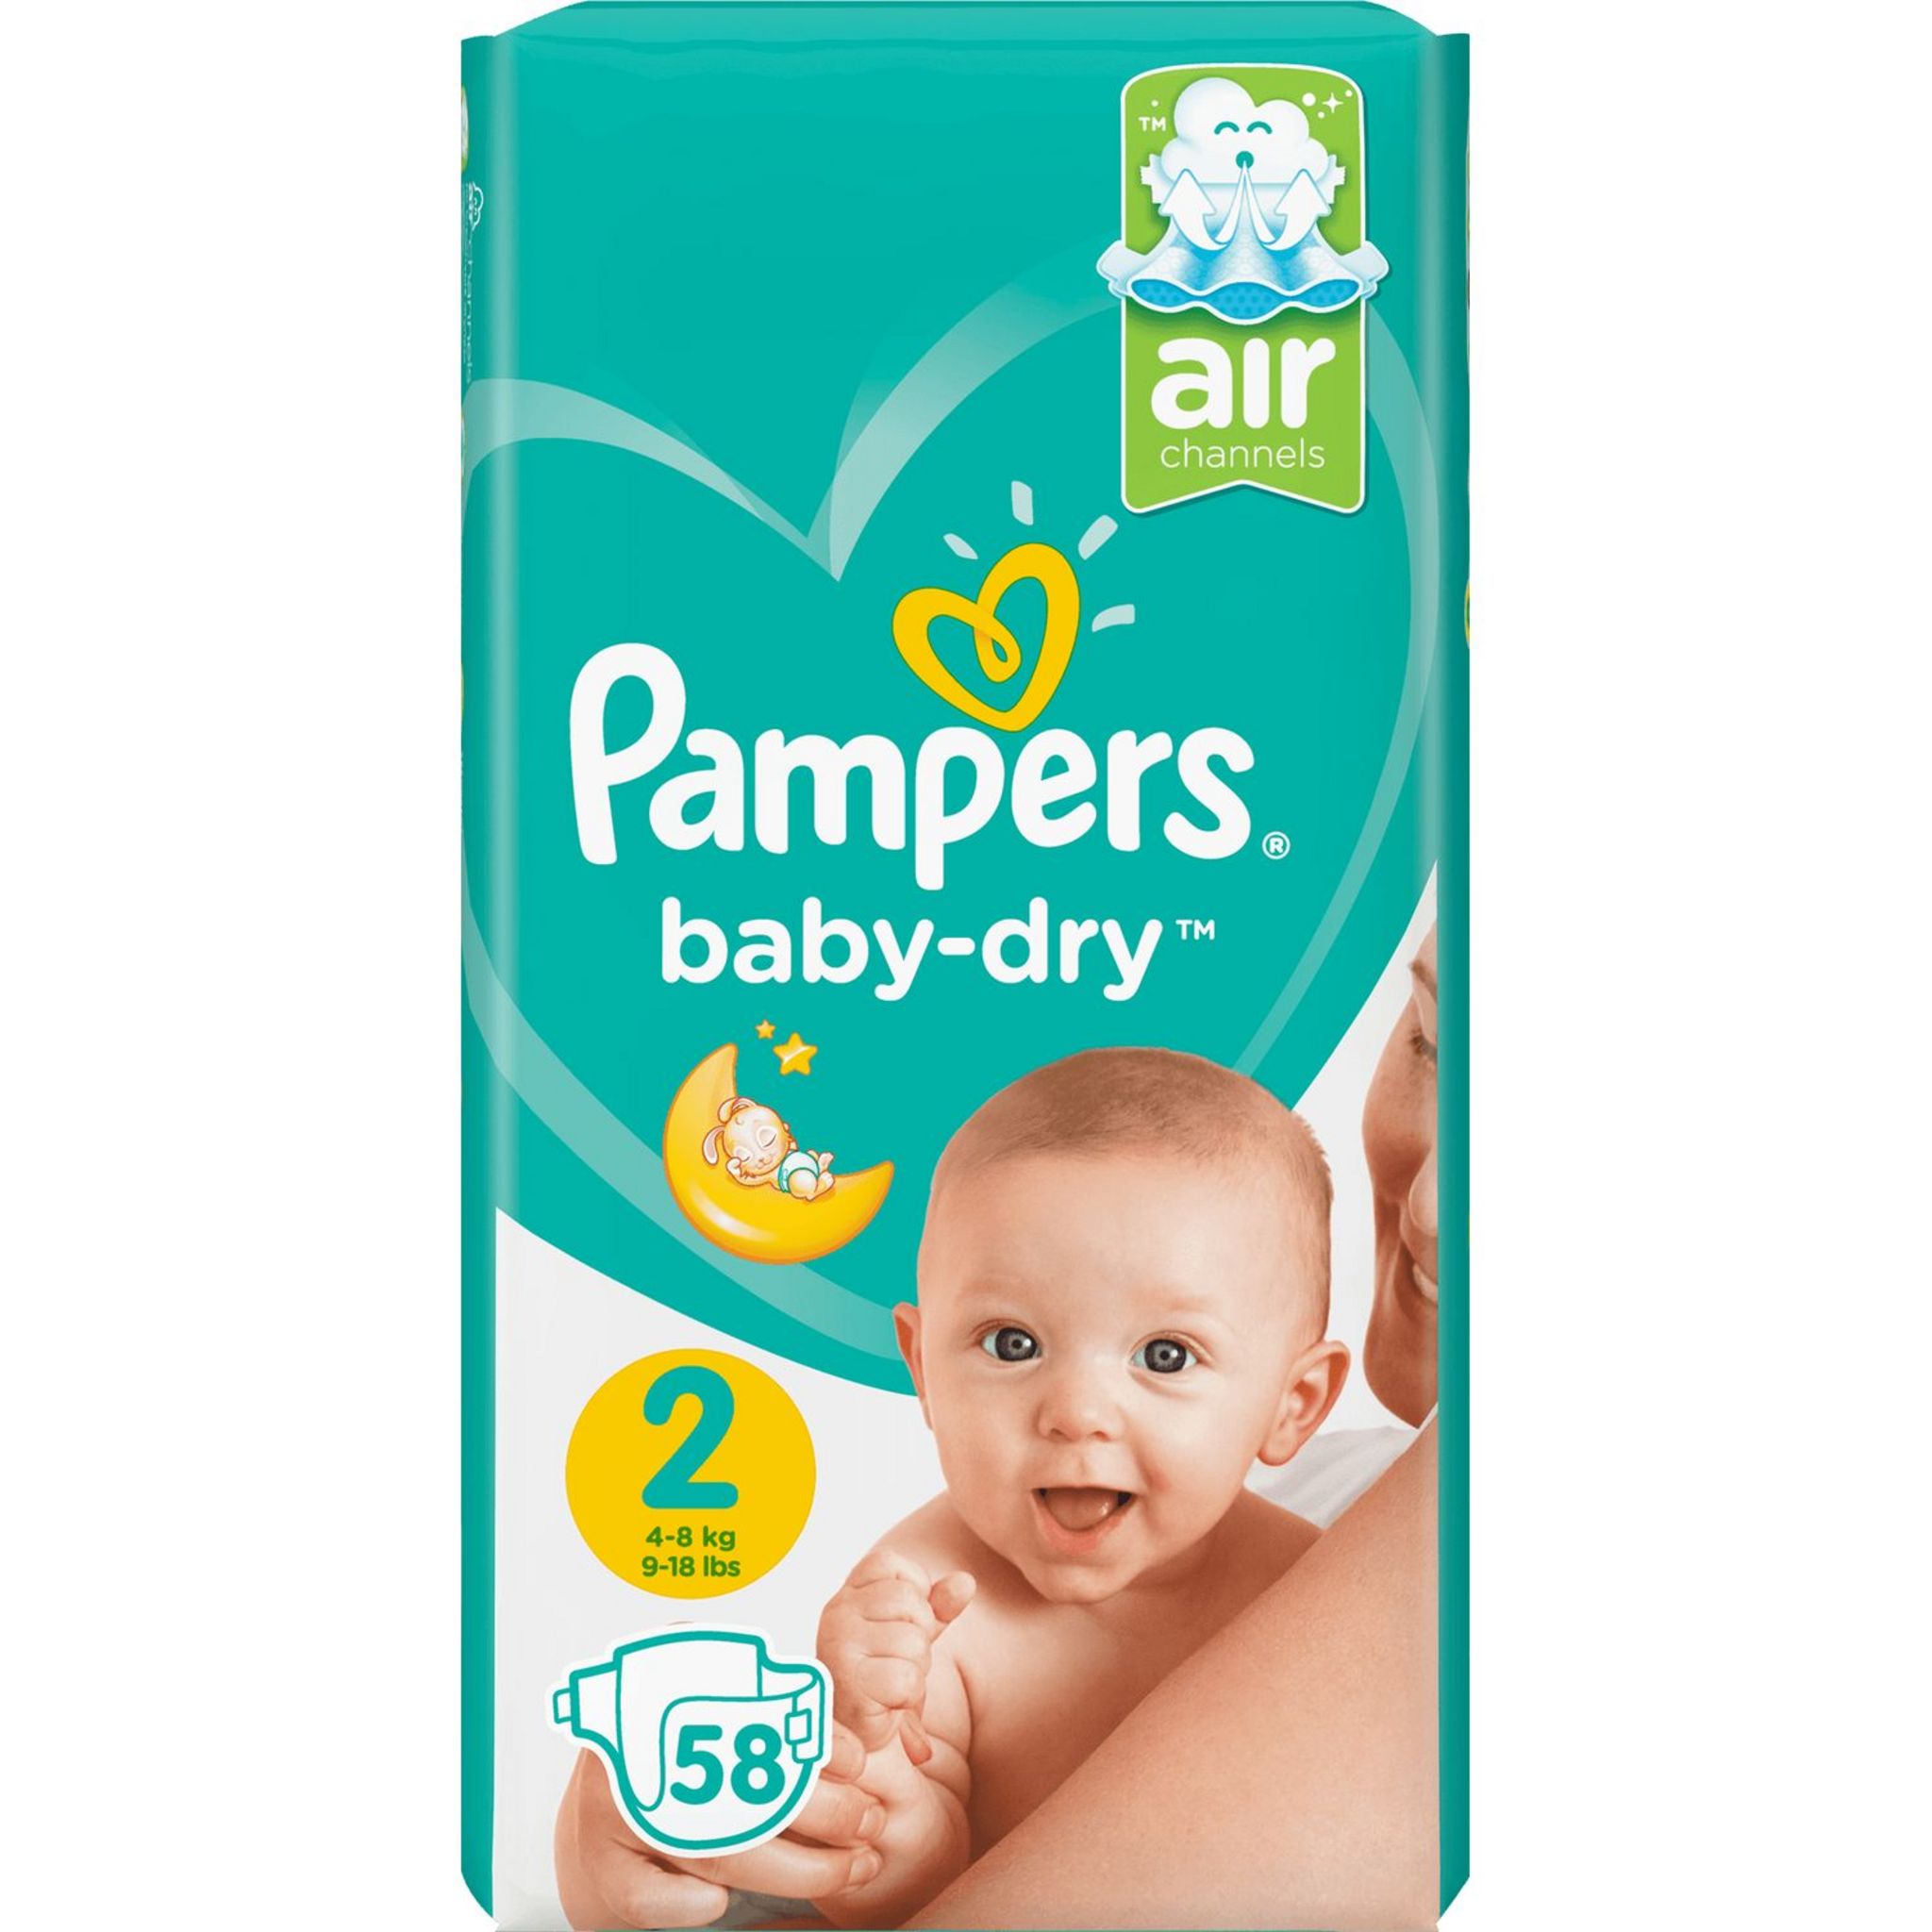 pampers active baby 3 174